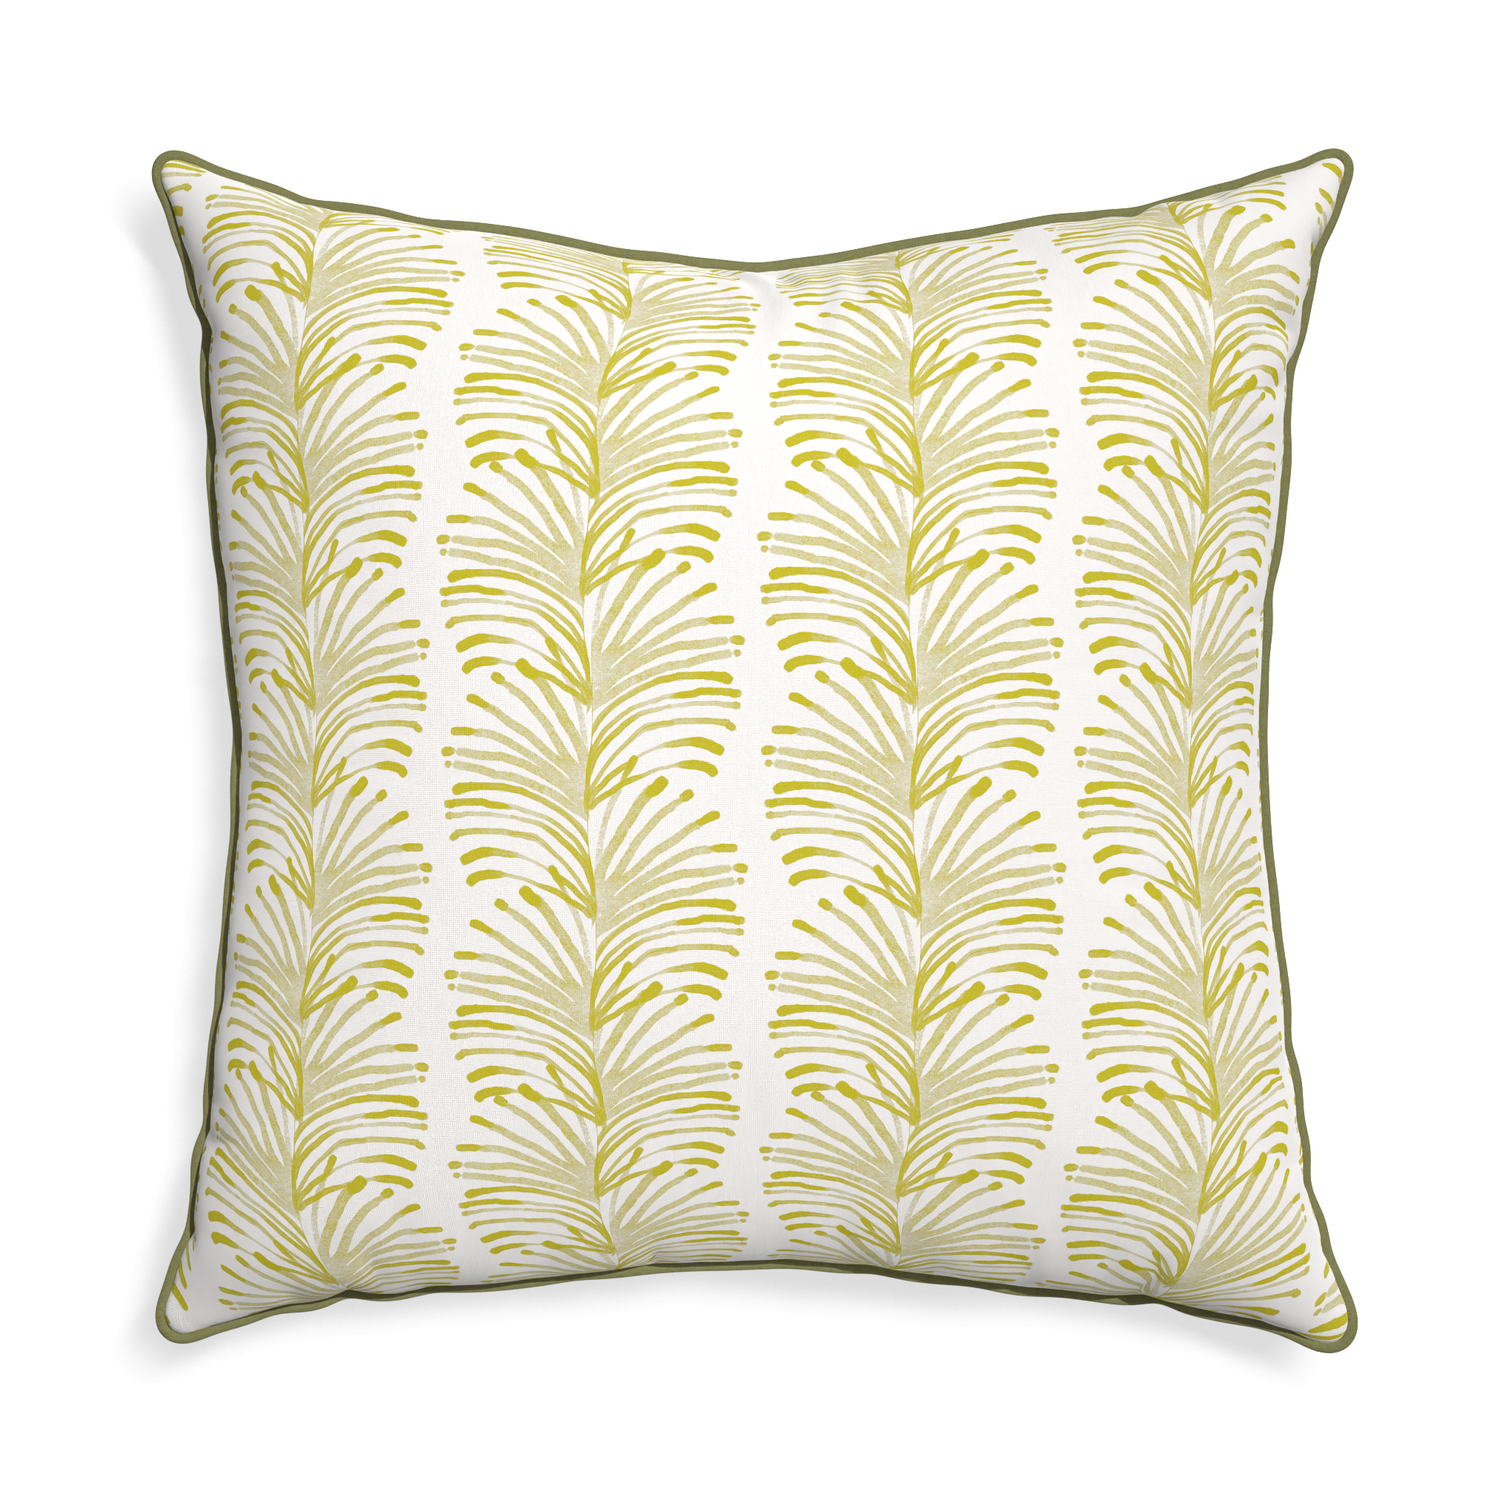 Euro-sham emma chartreuse custom yellow stripe chartreusepillow with moss piping on white background